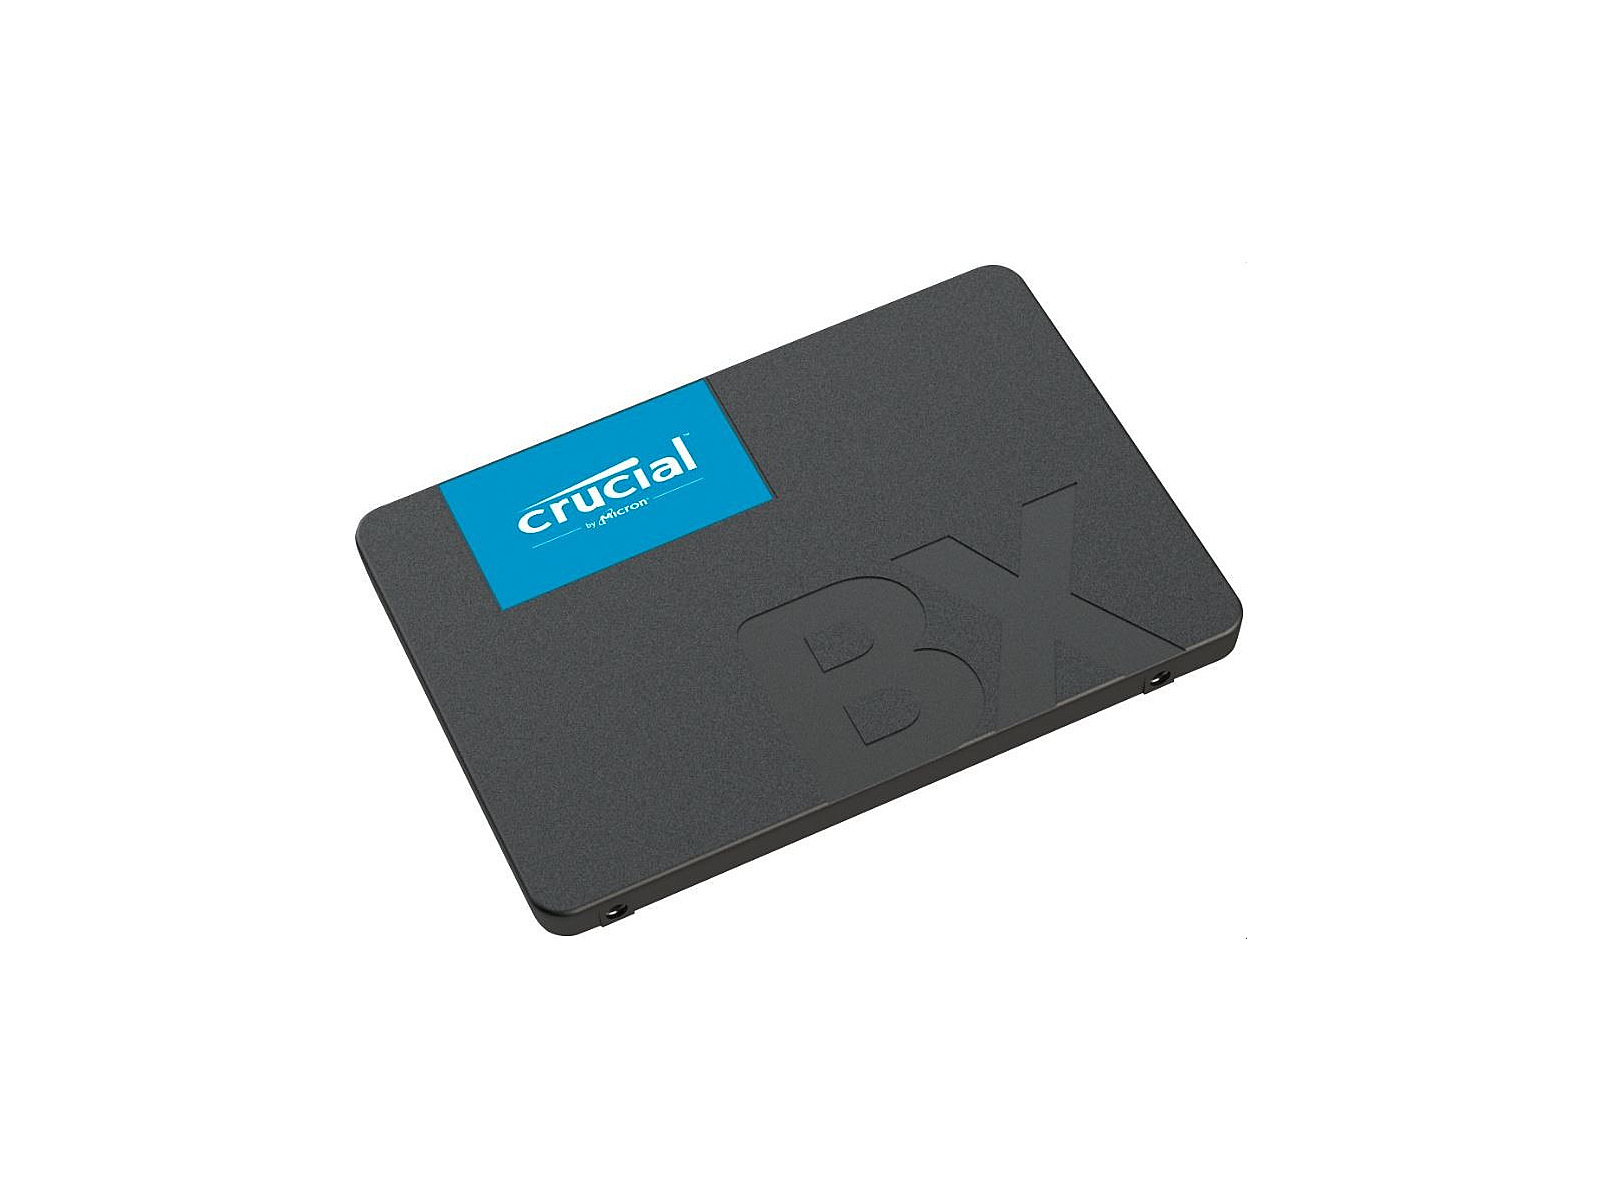 Crucial Bx500 Ssd 500gb 2 5 Zoll Sata 6gb S Interne Solid State Drive Ct500bx500ssd1